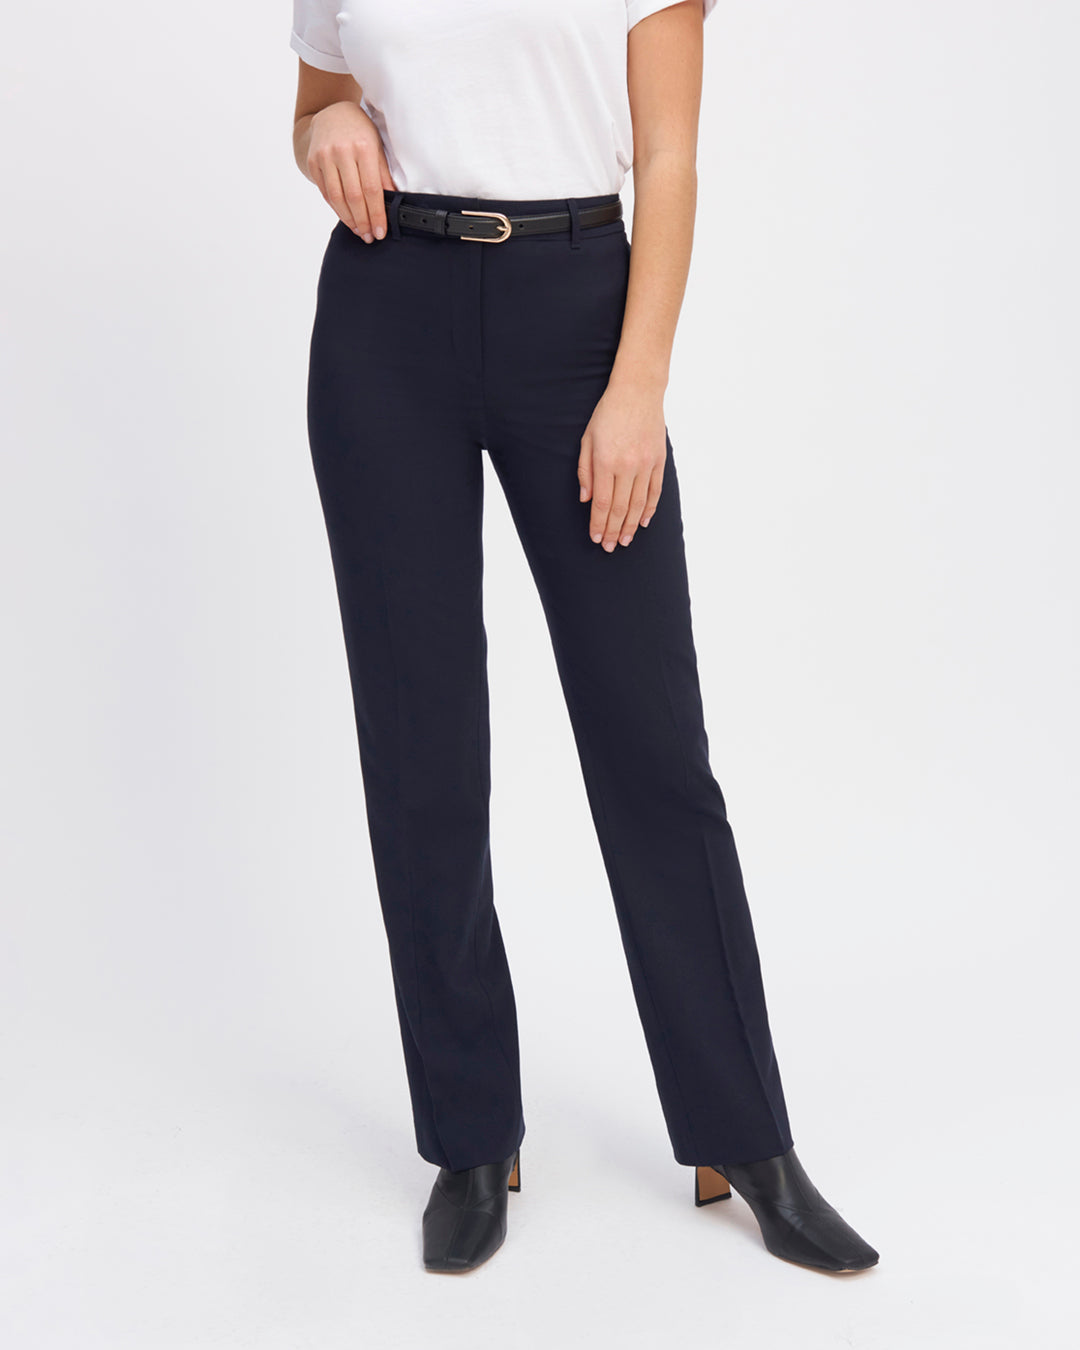 Navy-blue-tailor-trousers-Square-cut-High-waist-Lined-for-a-straight-dress-Navy-blue-wool-drap-Belt-panels-Zip-closure-with-hook-Button-camel-17H10-tailors-for-women-paris-